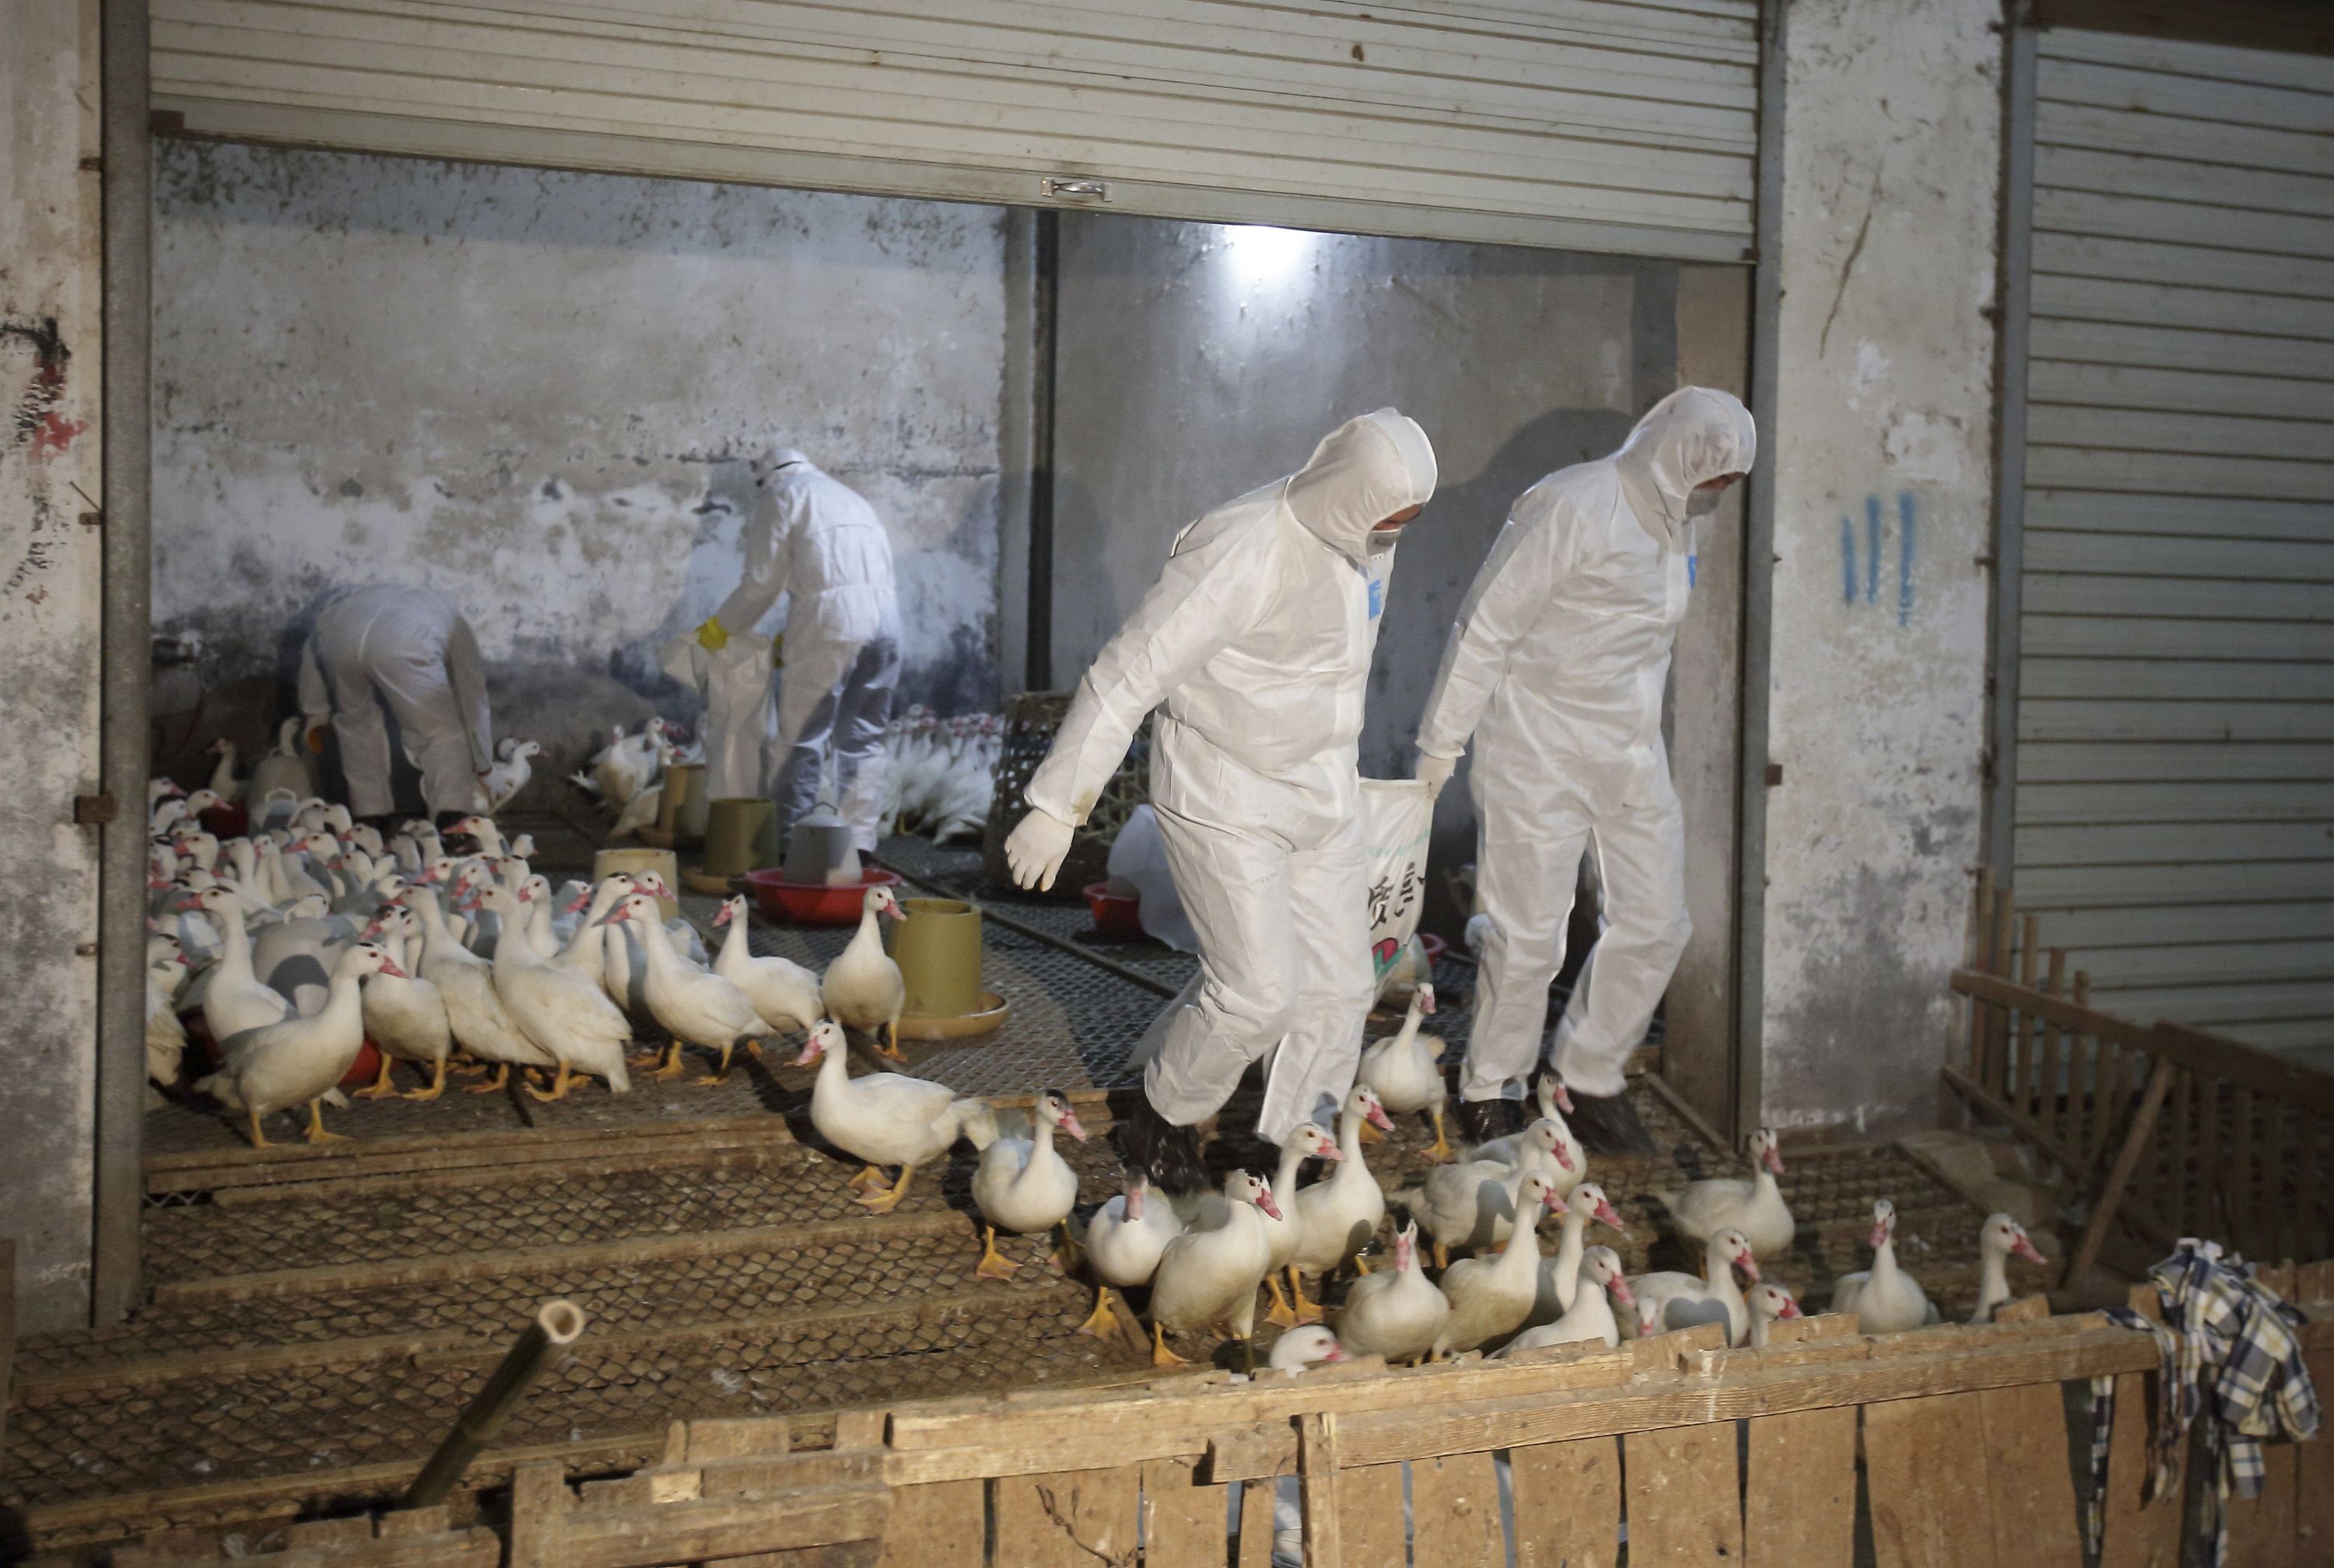 Health officials transport sacks of poultry as part of preventive measures against the H7N9 bird flu at a poultry market in Zhuji. A senior Chinese disease control official warned the H7N9 strain of bird flu had peaked again since last December. Photo: Reuters